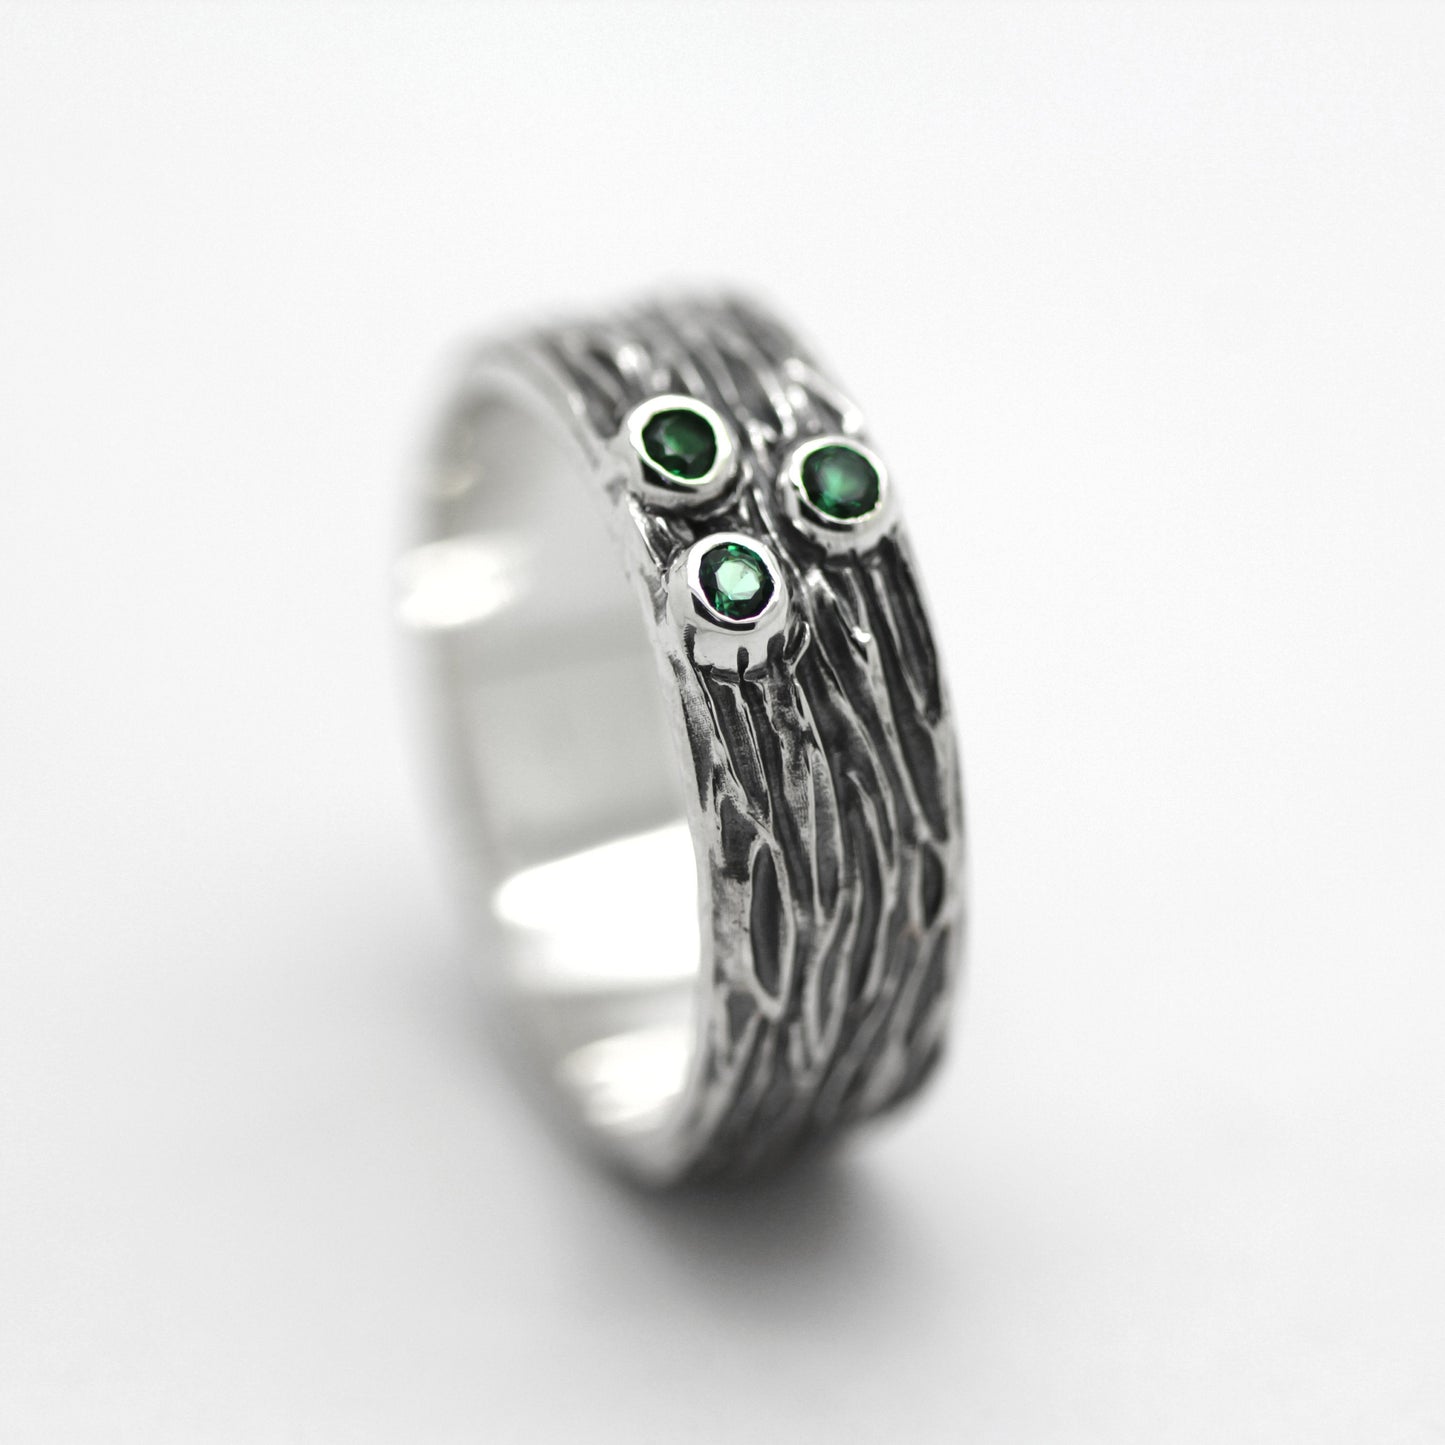 Woody Style Engagement Silver Ring with Green Gemstones